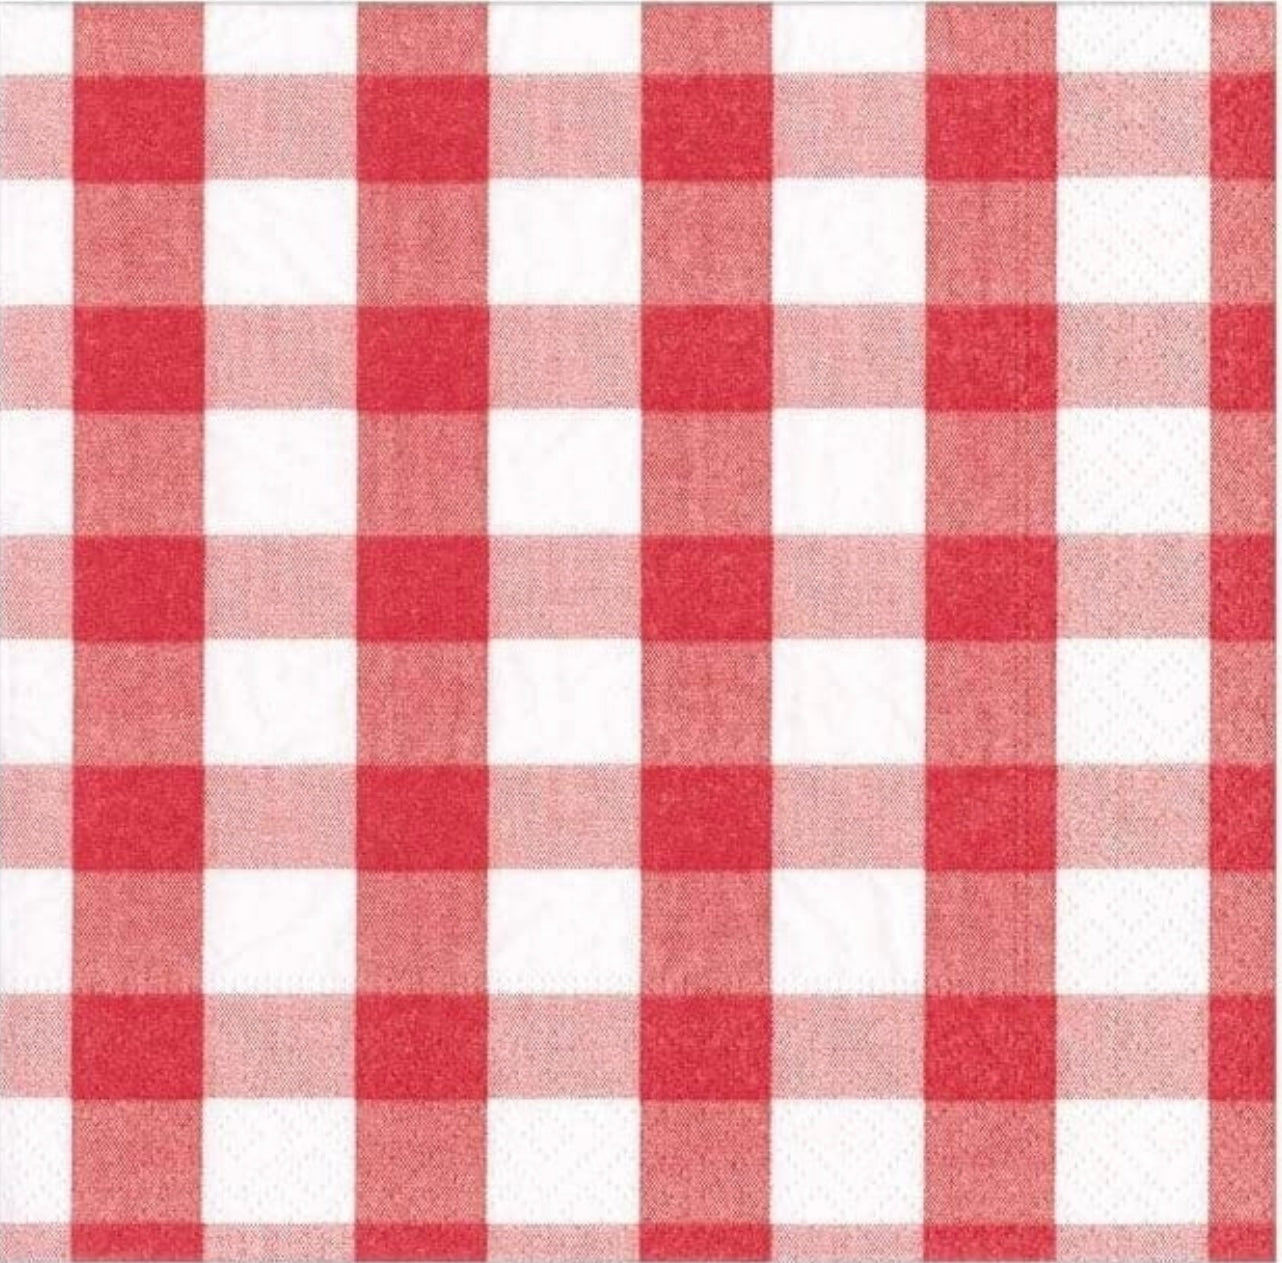 Paper Napkins - Red Gingham - Luncheon Size 20 Pack